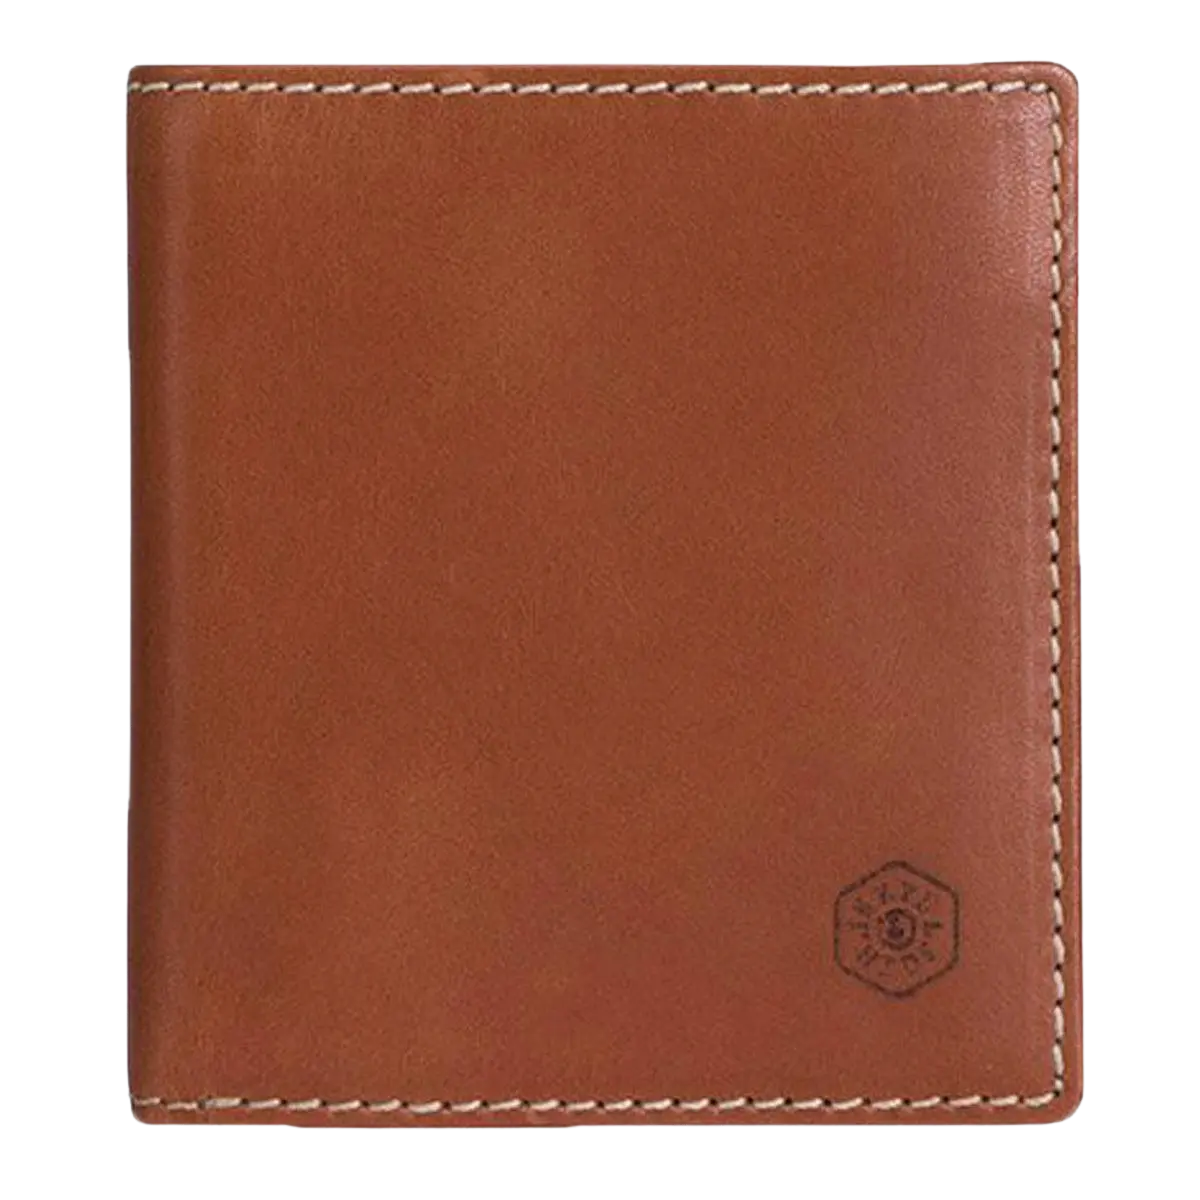 Jekyll & Hide Roma Bifold Coin Wallet